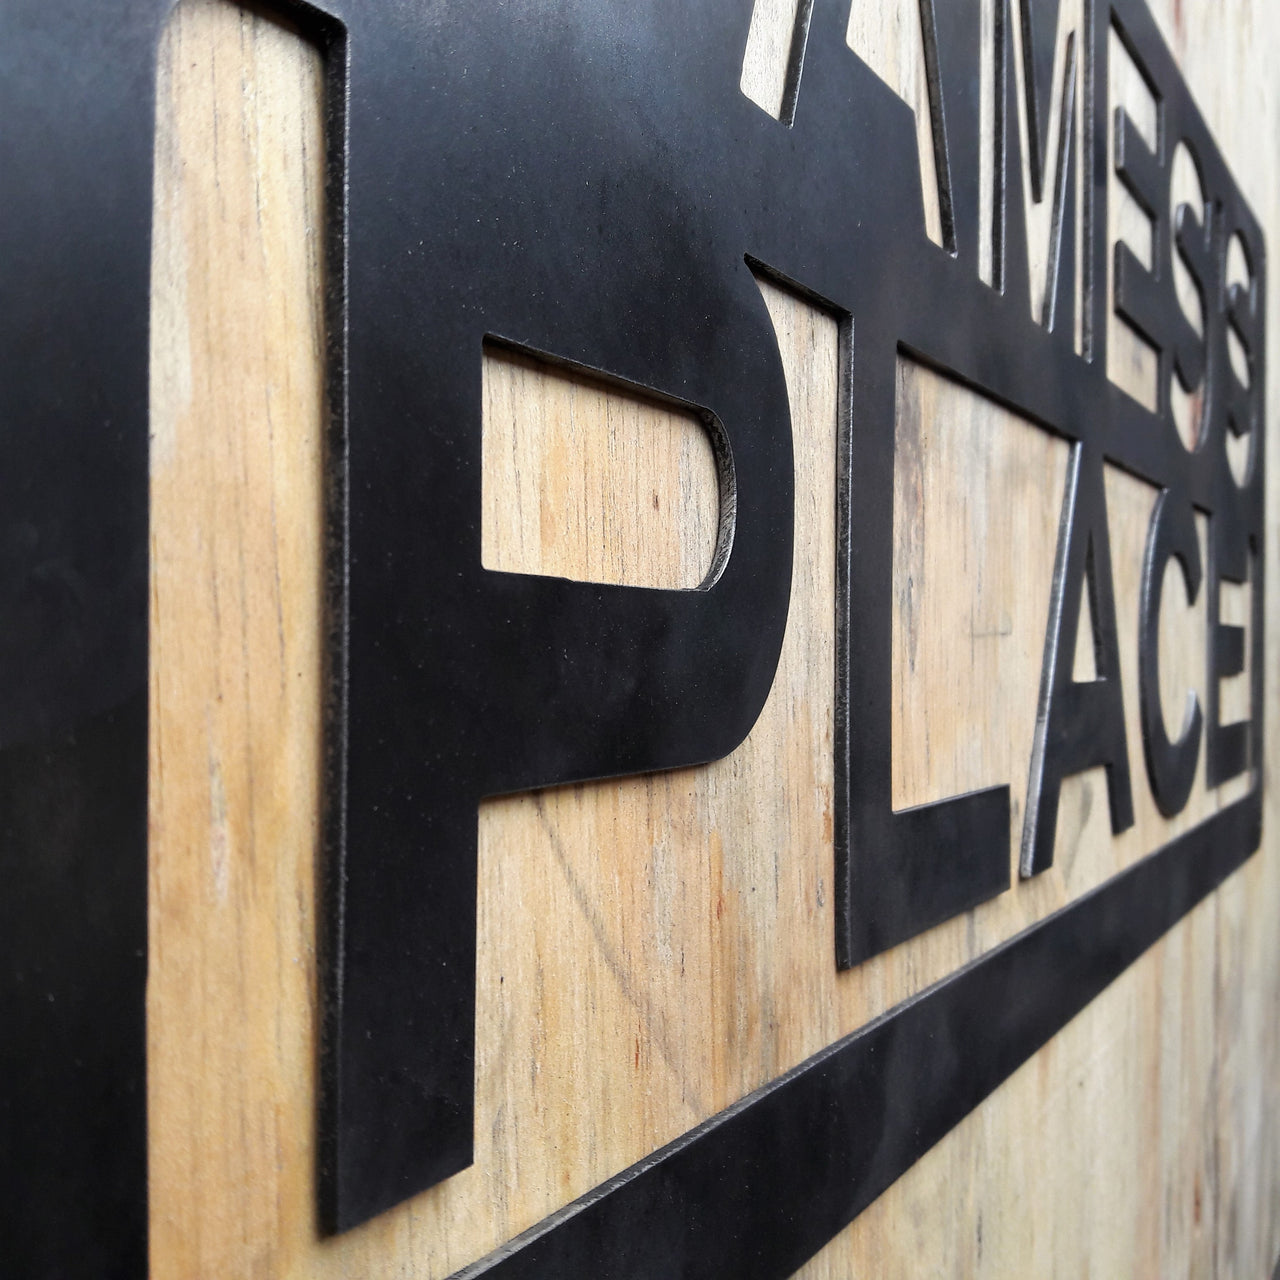 This is a custom metal sign that reads, "James's Place".